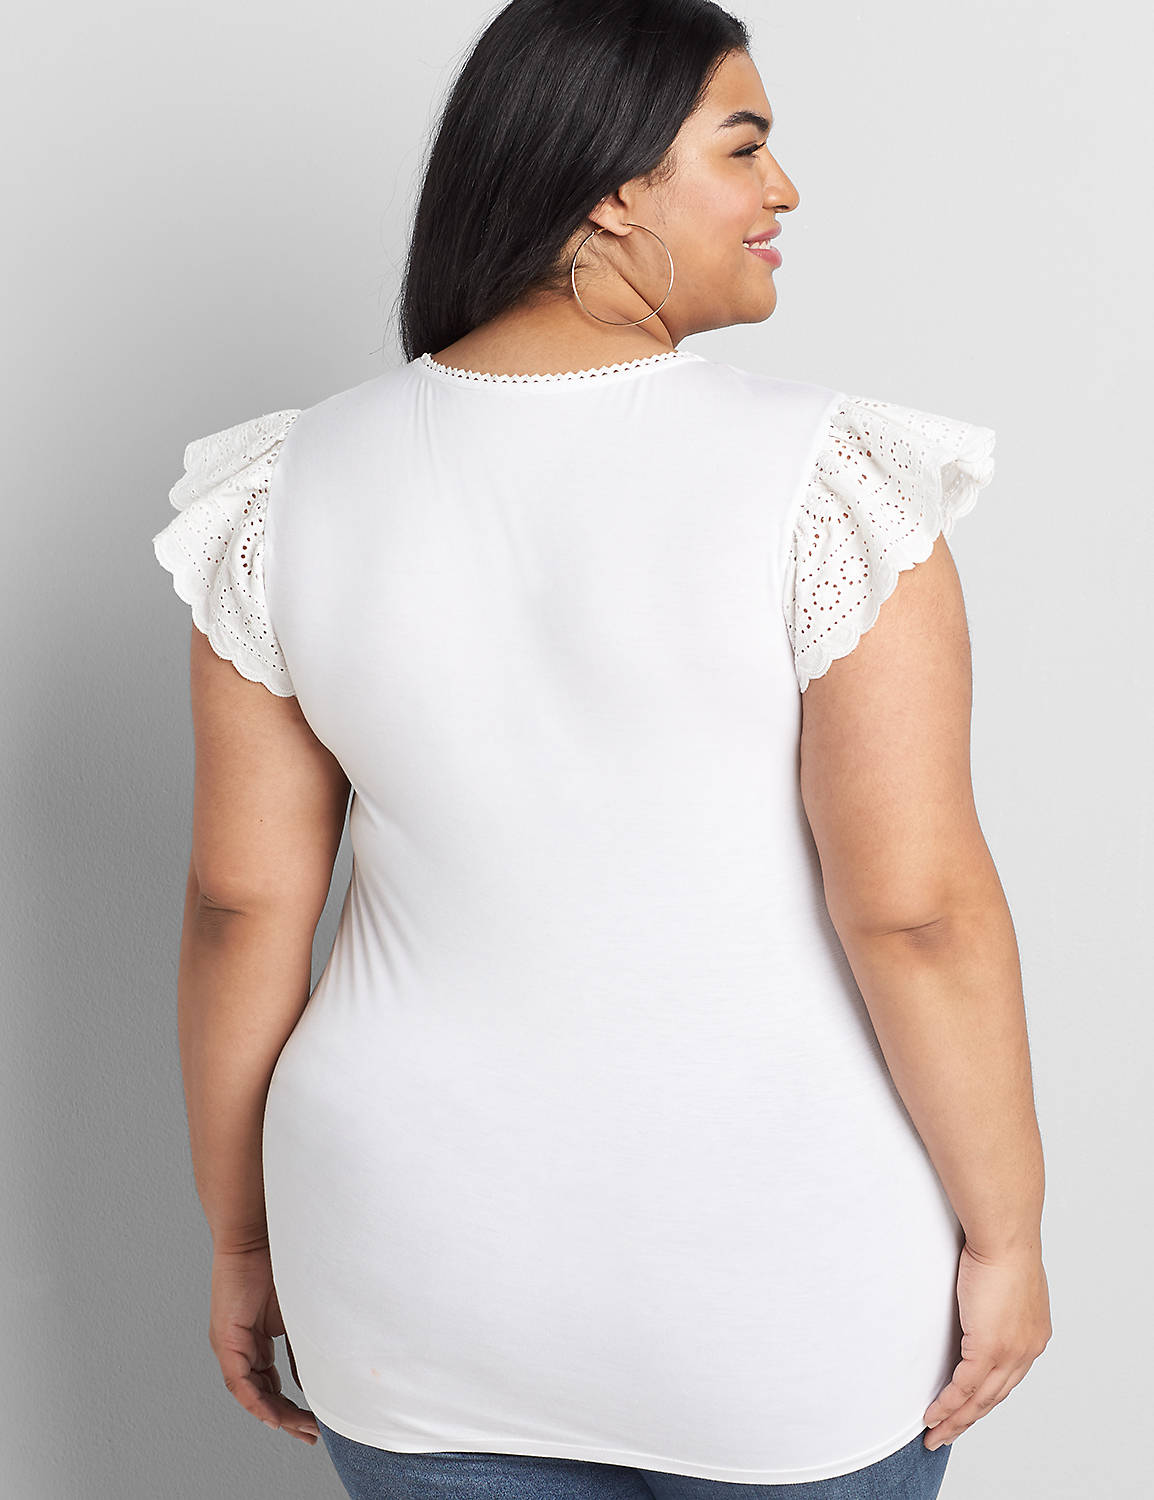 Sleeveless With Crew Neck With Button Keyhole In Eyelet and Knit Back 1119627:Ascena White:38/40 Product Image 2